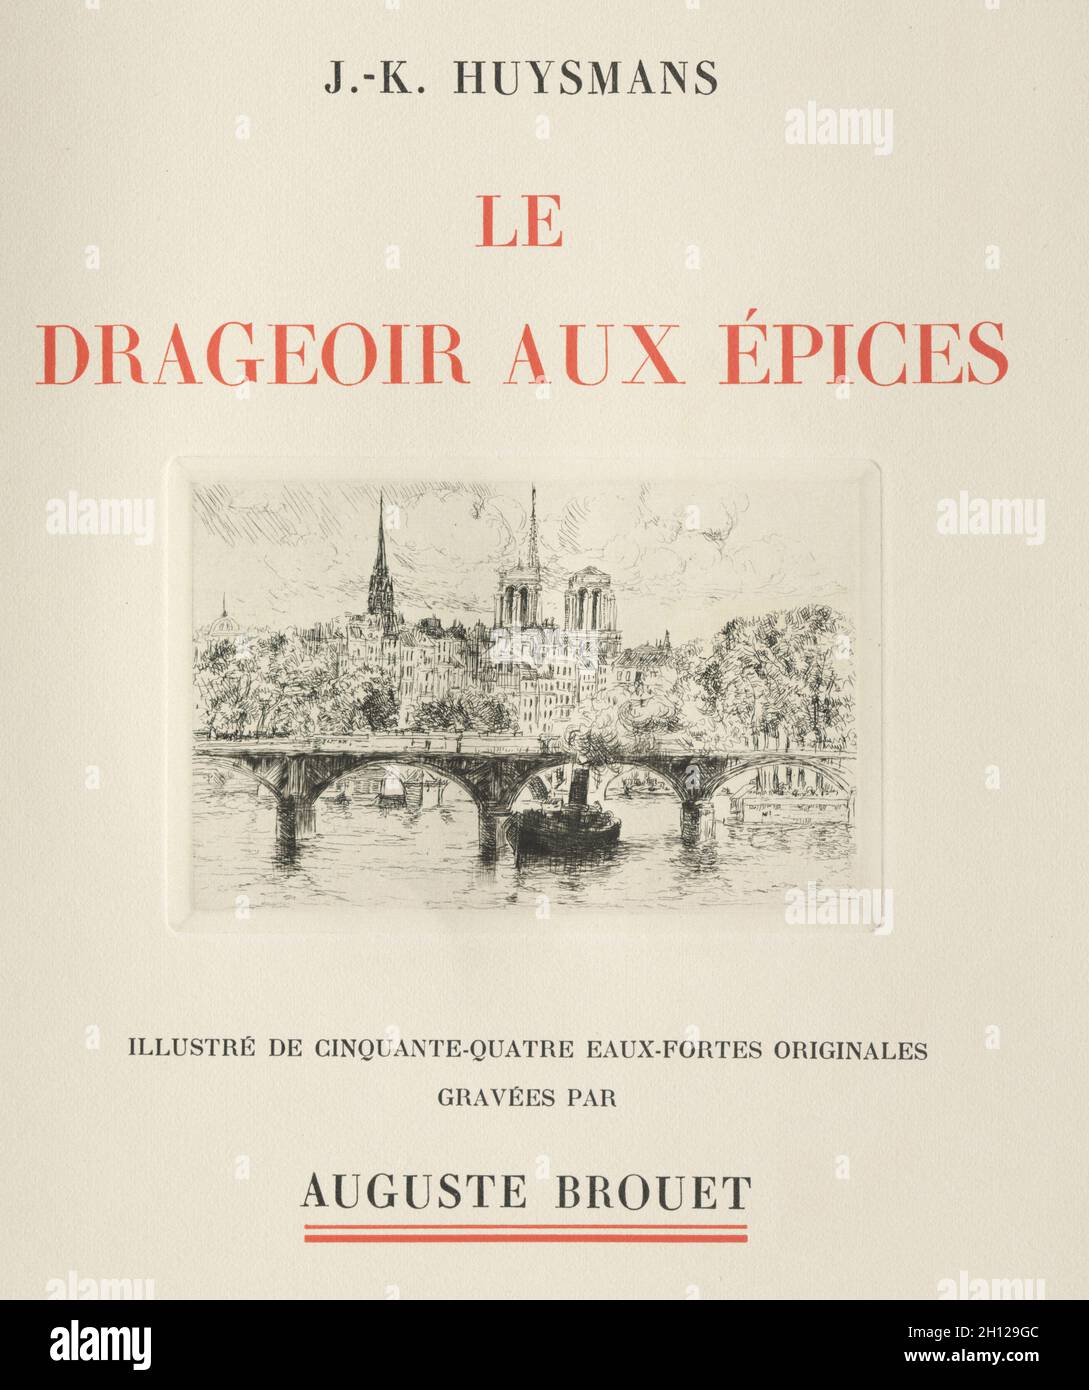 Le Drageoir aux épices by J. K. Huysmans: p. 5, 1929. Auguste Brouet (French, 1872-1941), J.K. Huysmans (French). Book containing 54 etchings; overall: 28.7 x 23.3 x 4.5 cm (11 5/16 x 9 3/16 x 1 3/4 in.). Stock Photo